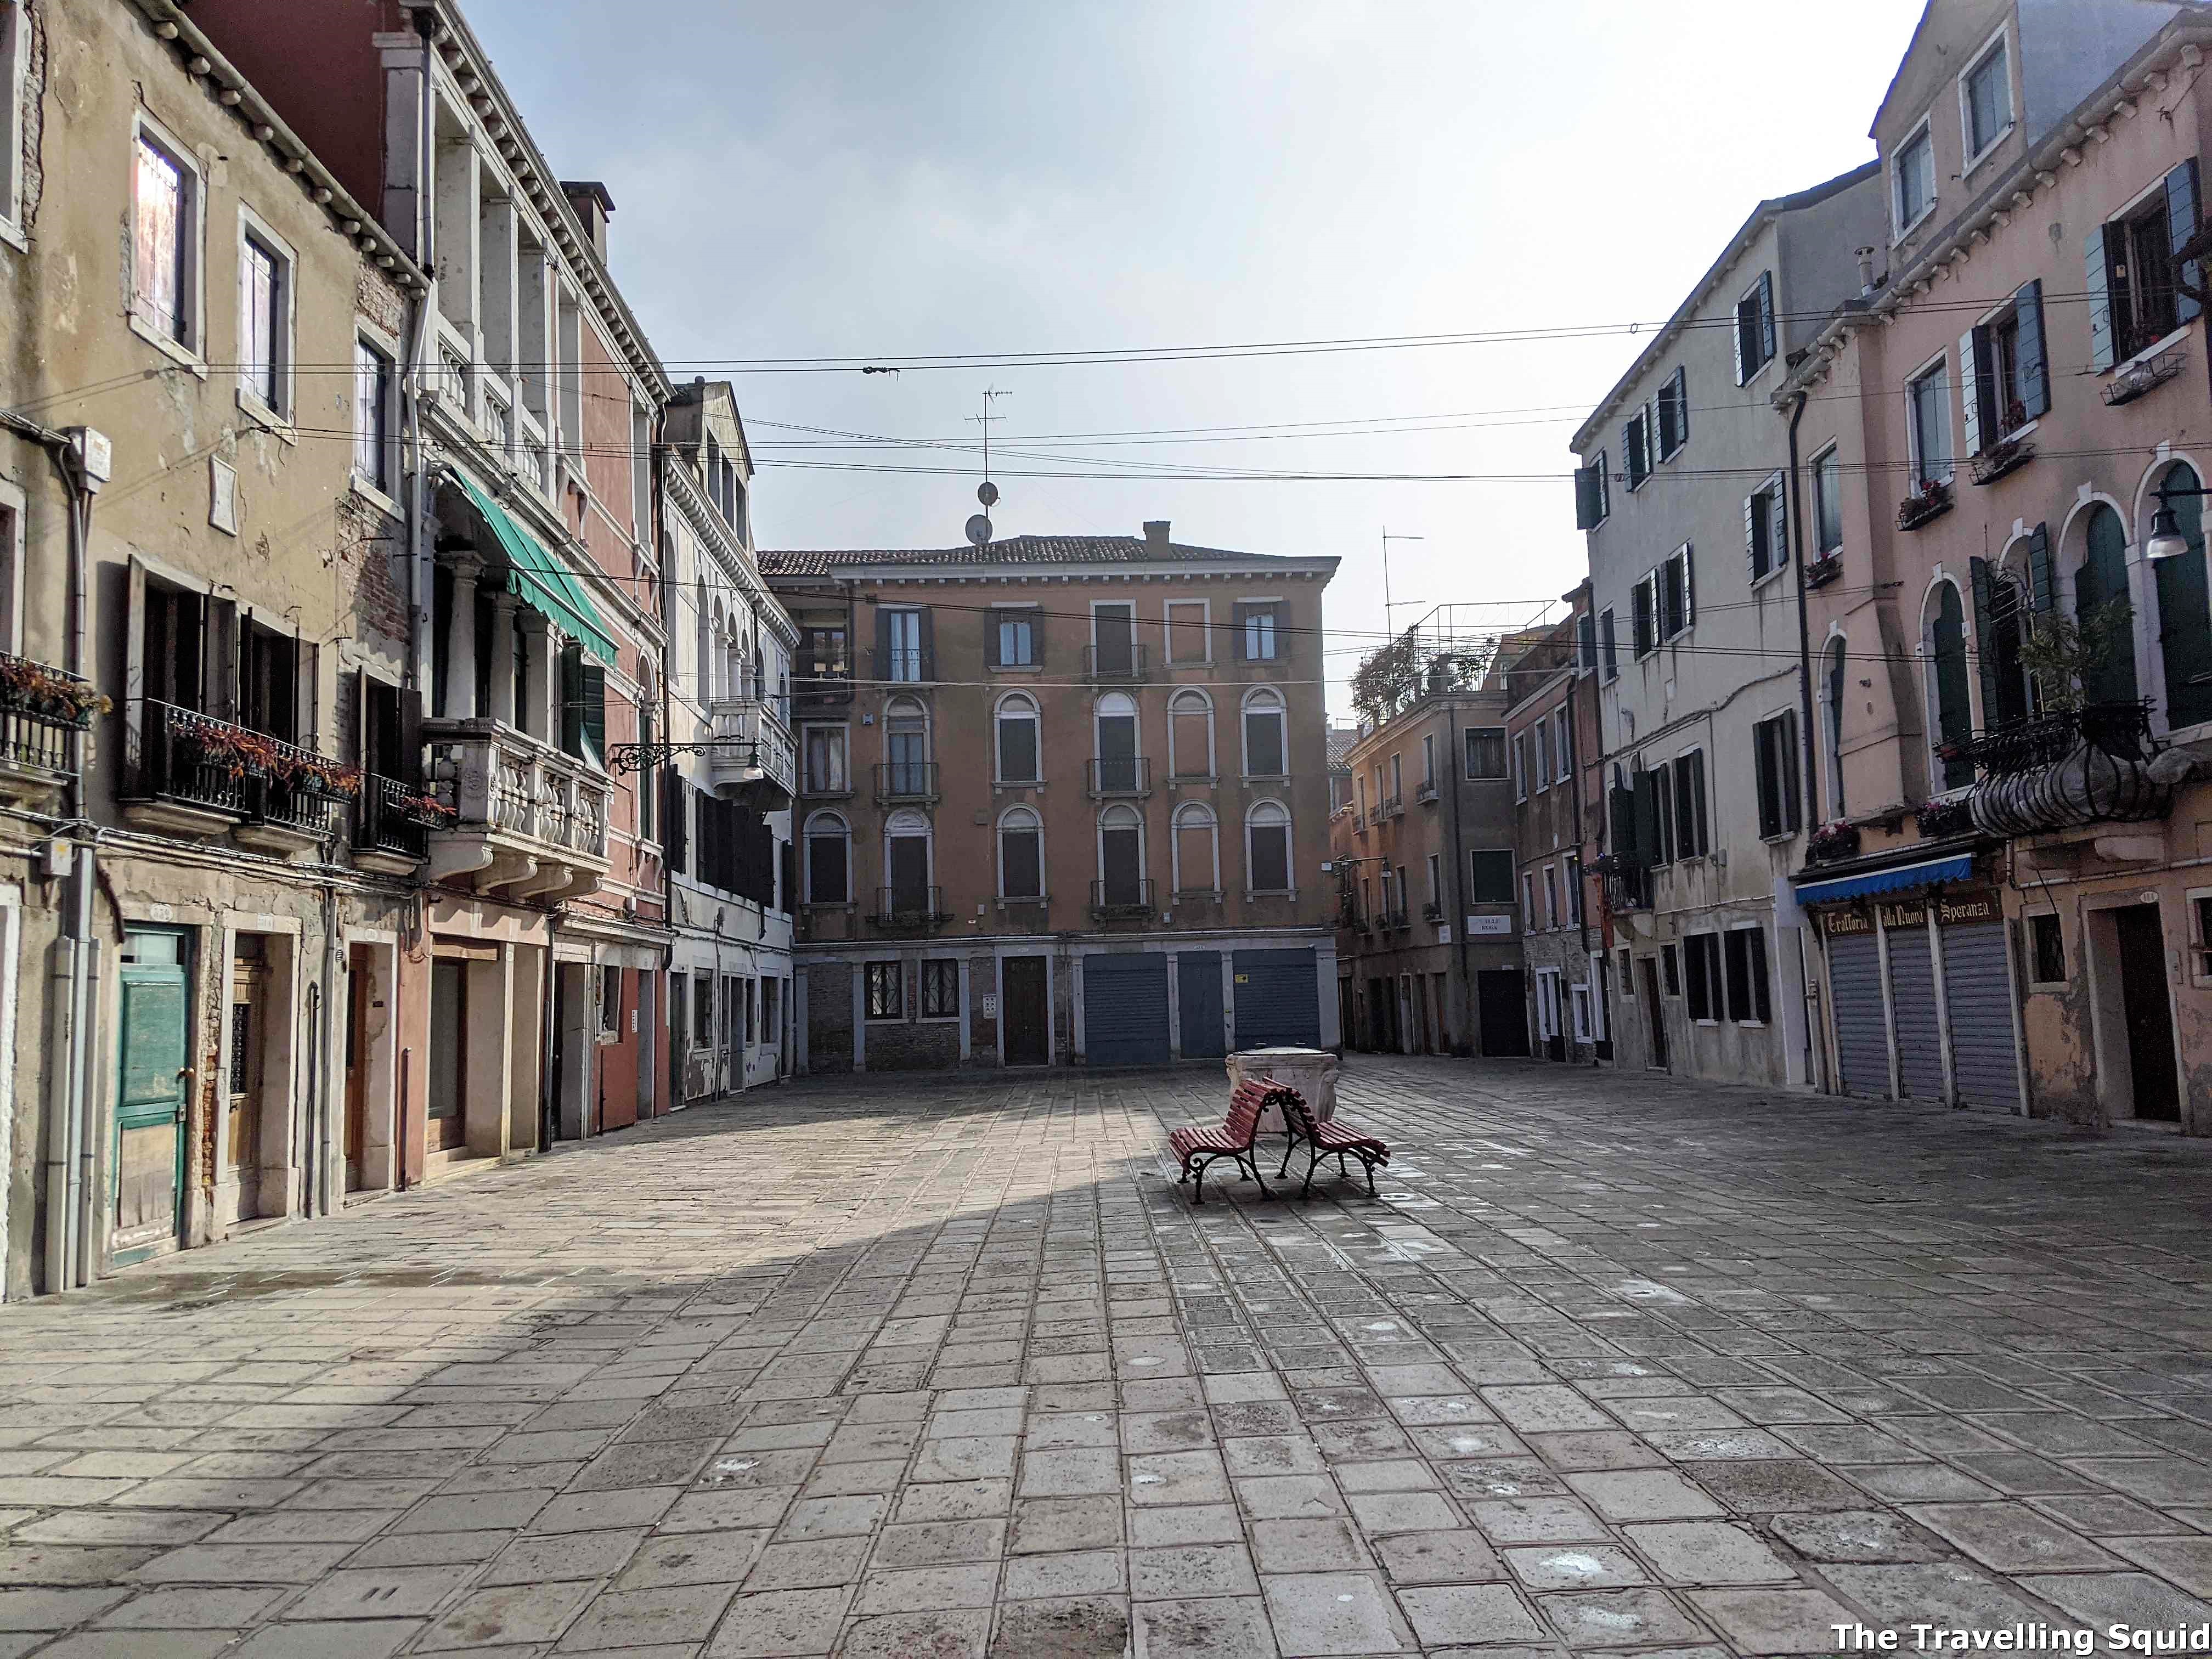 Why are there so many empty buildings in Venice?